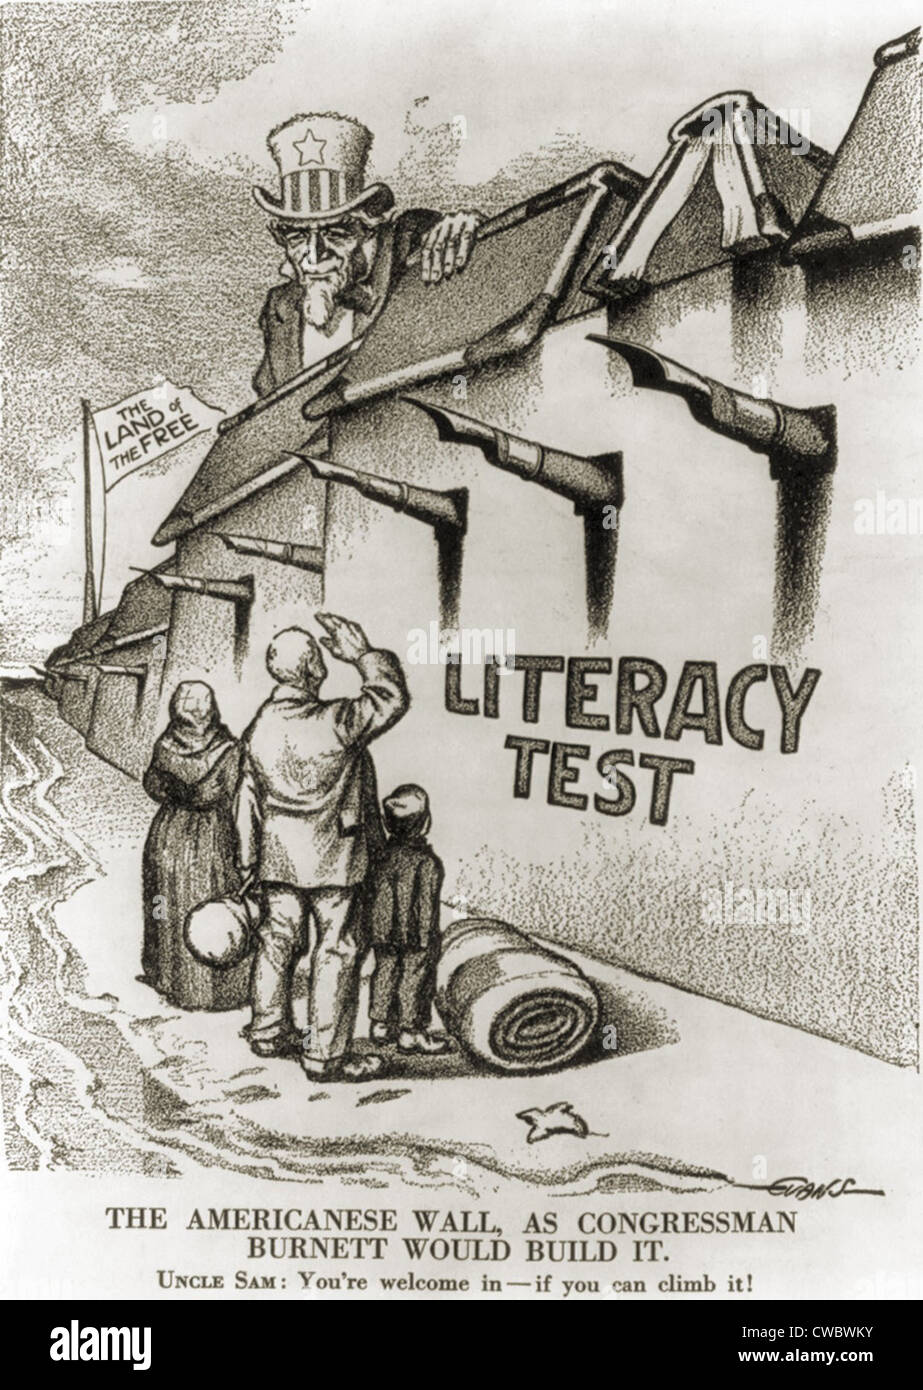 1916 political cartoon entitled THE AMERICANESE WALL - AS CONGRESSMAN BURNETT WOULD BUILD IT. In the 1910's, anti-immigrant Stock Photo